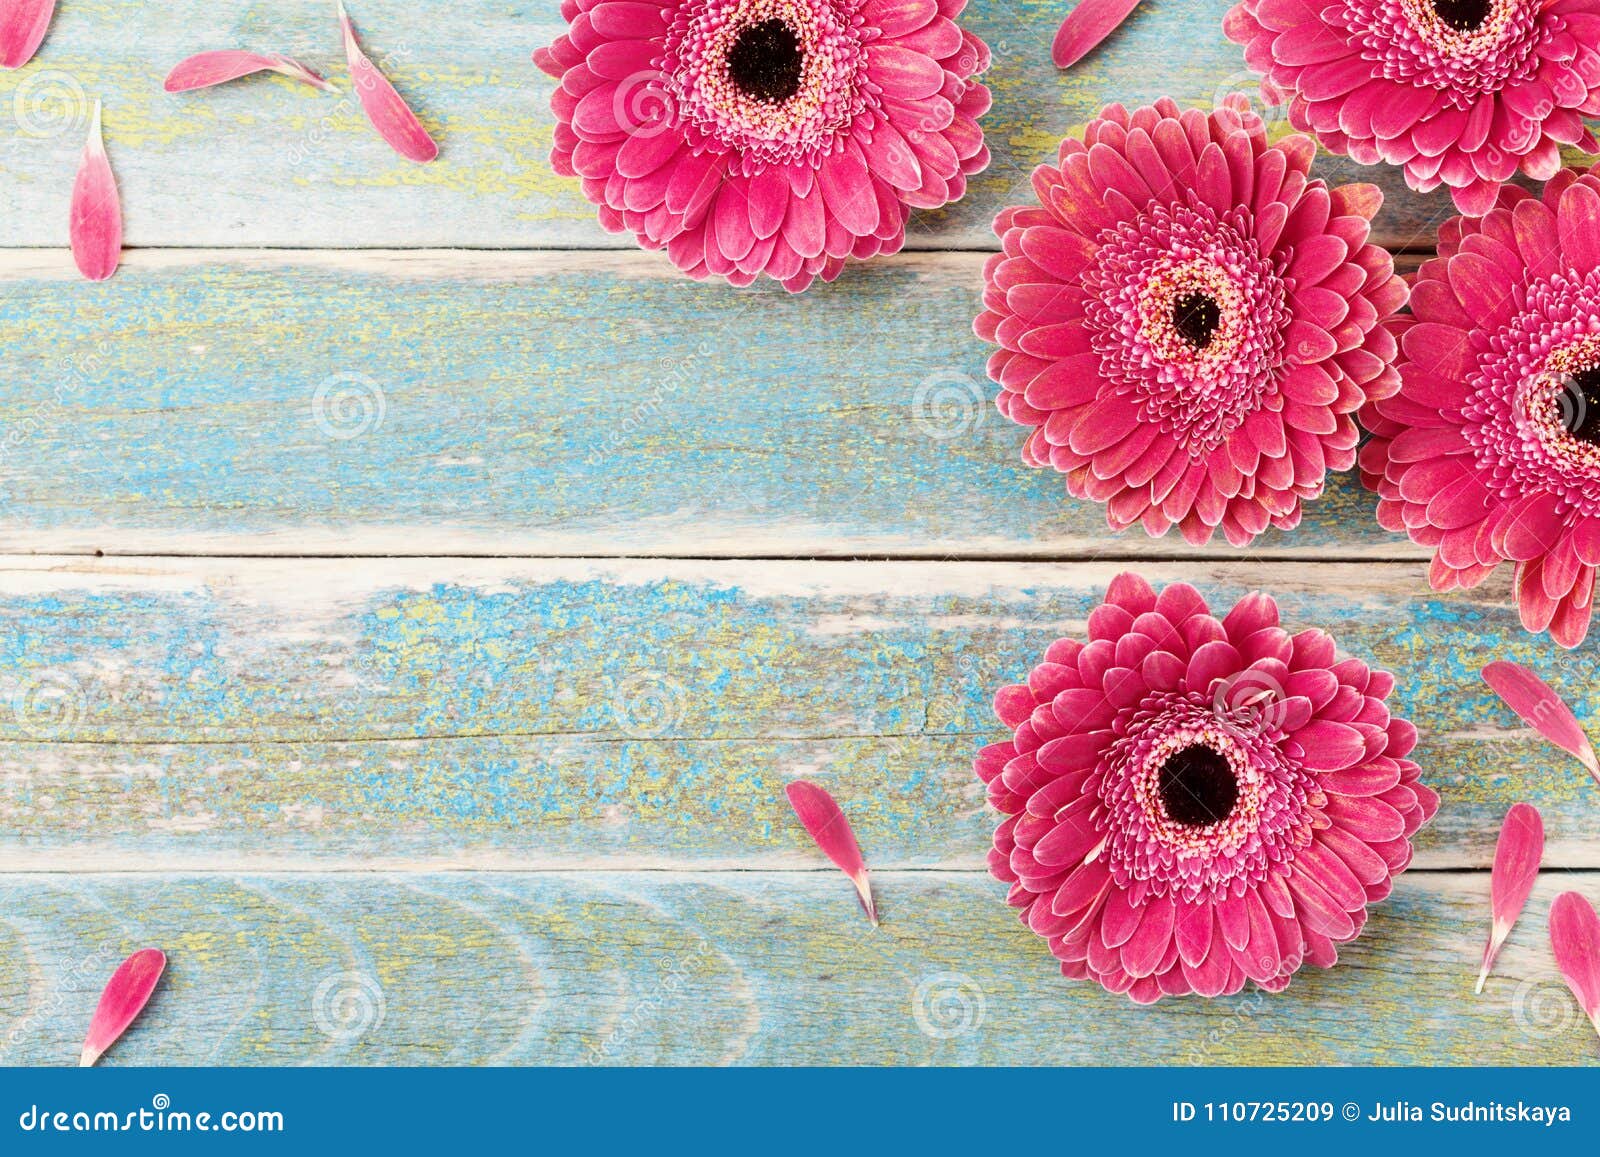 gerbera daisy flower greeting card background for mother or womans day. vintage style. top view.